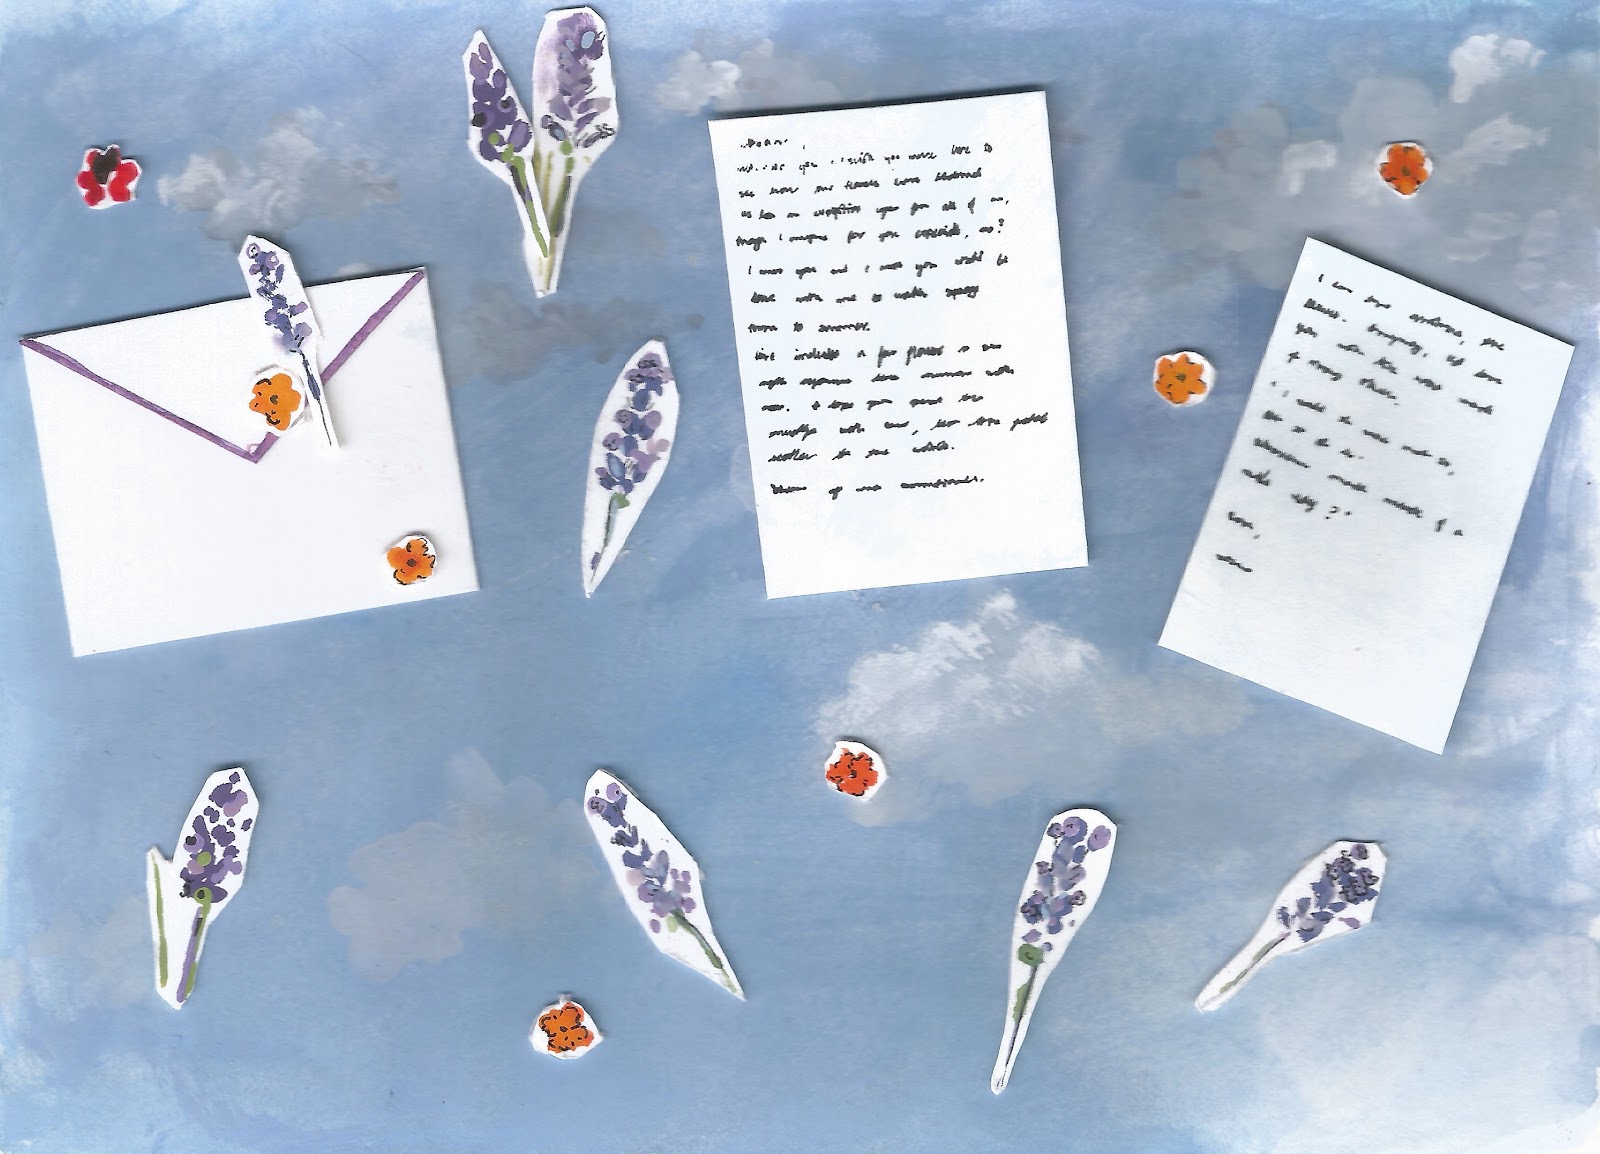 Illustration of handwritten letters by Chloé Mauvais.